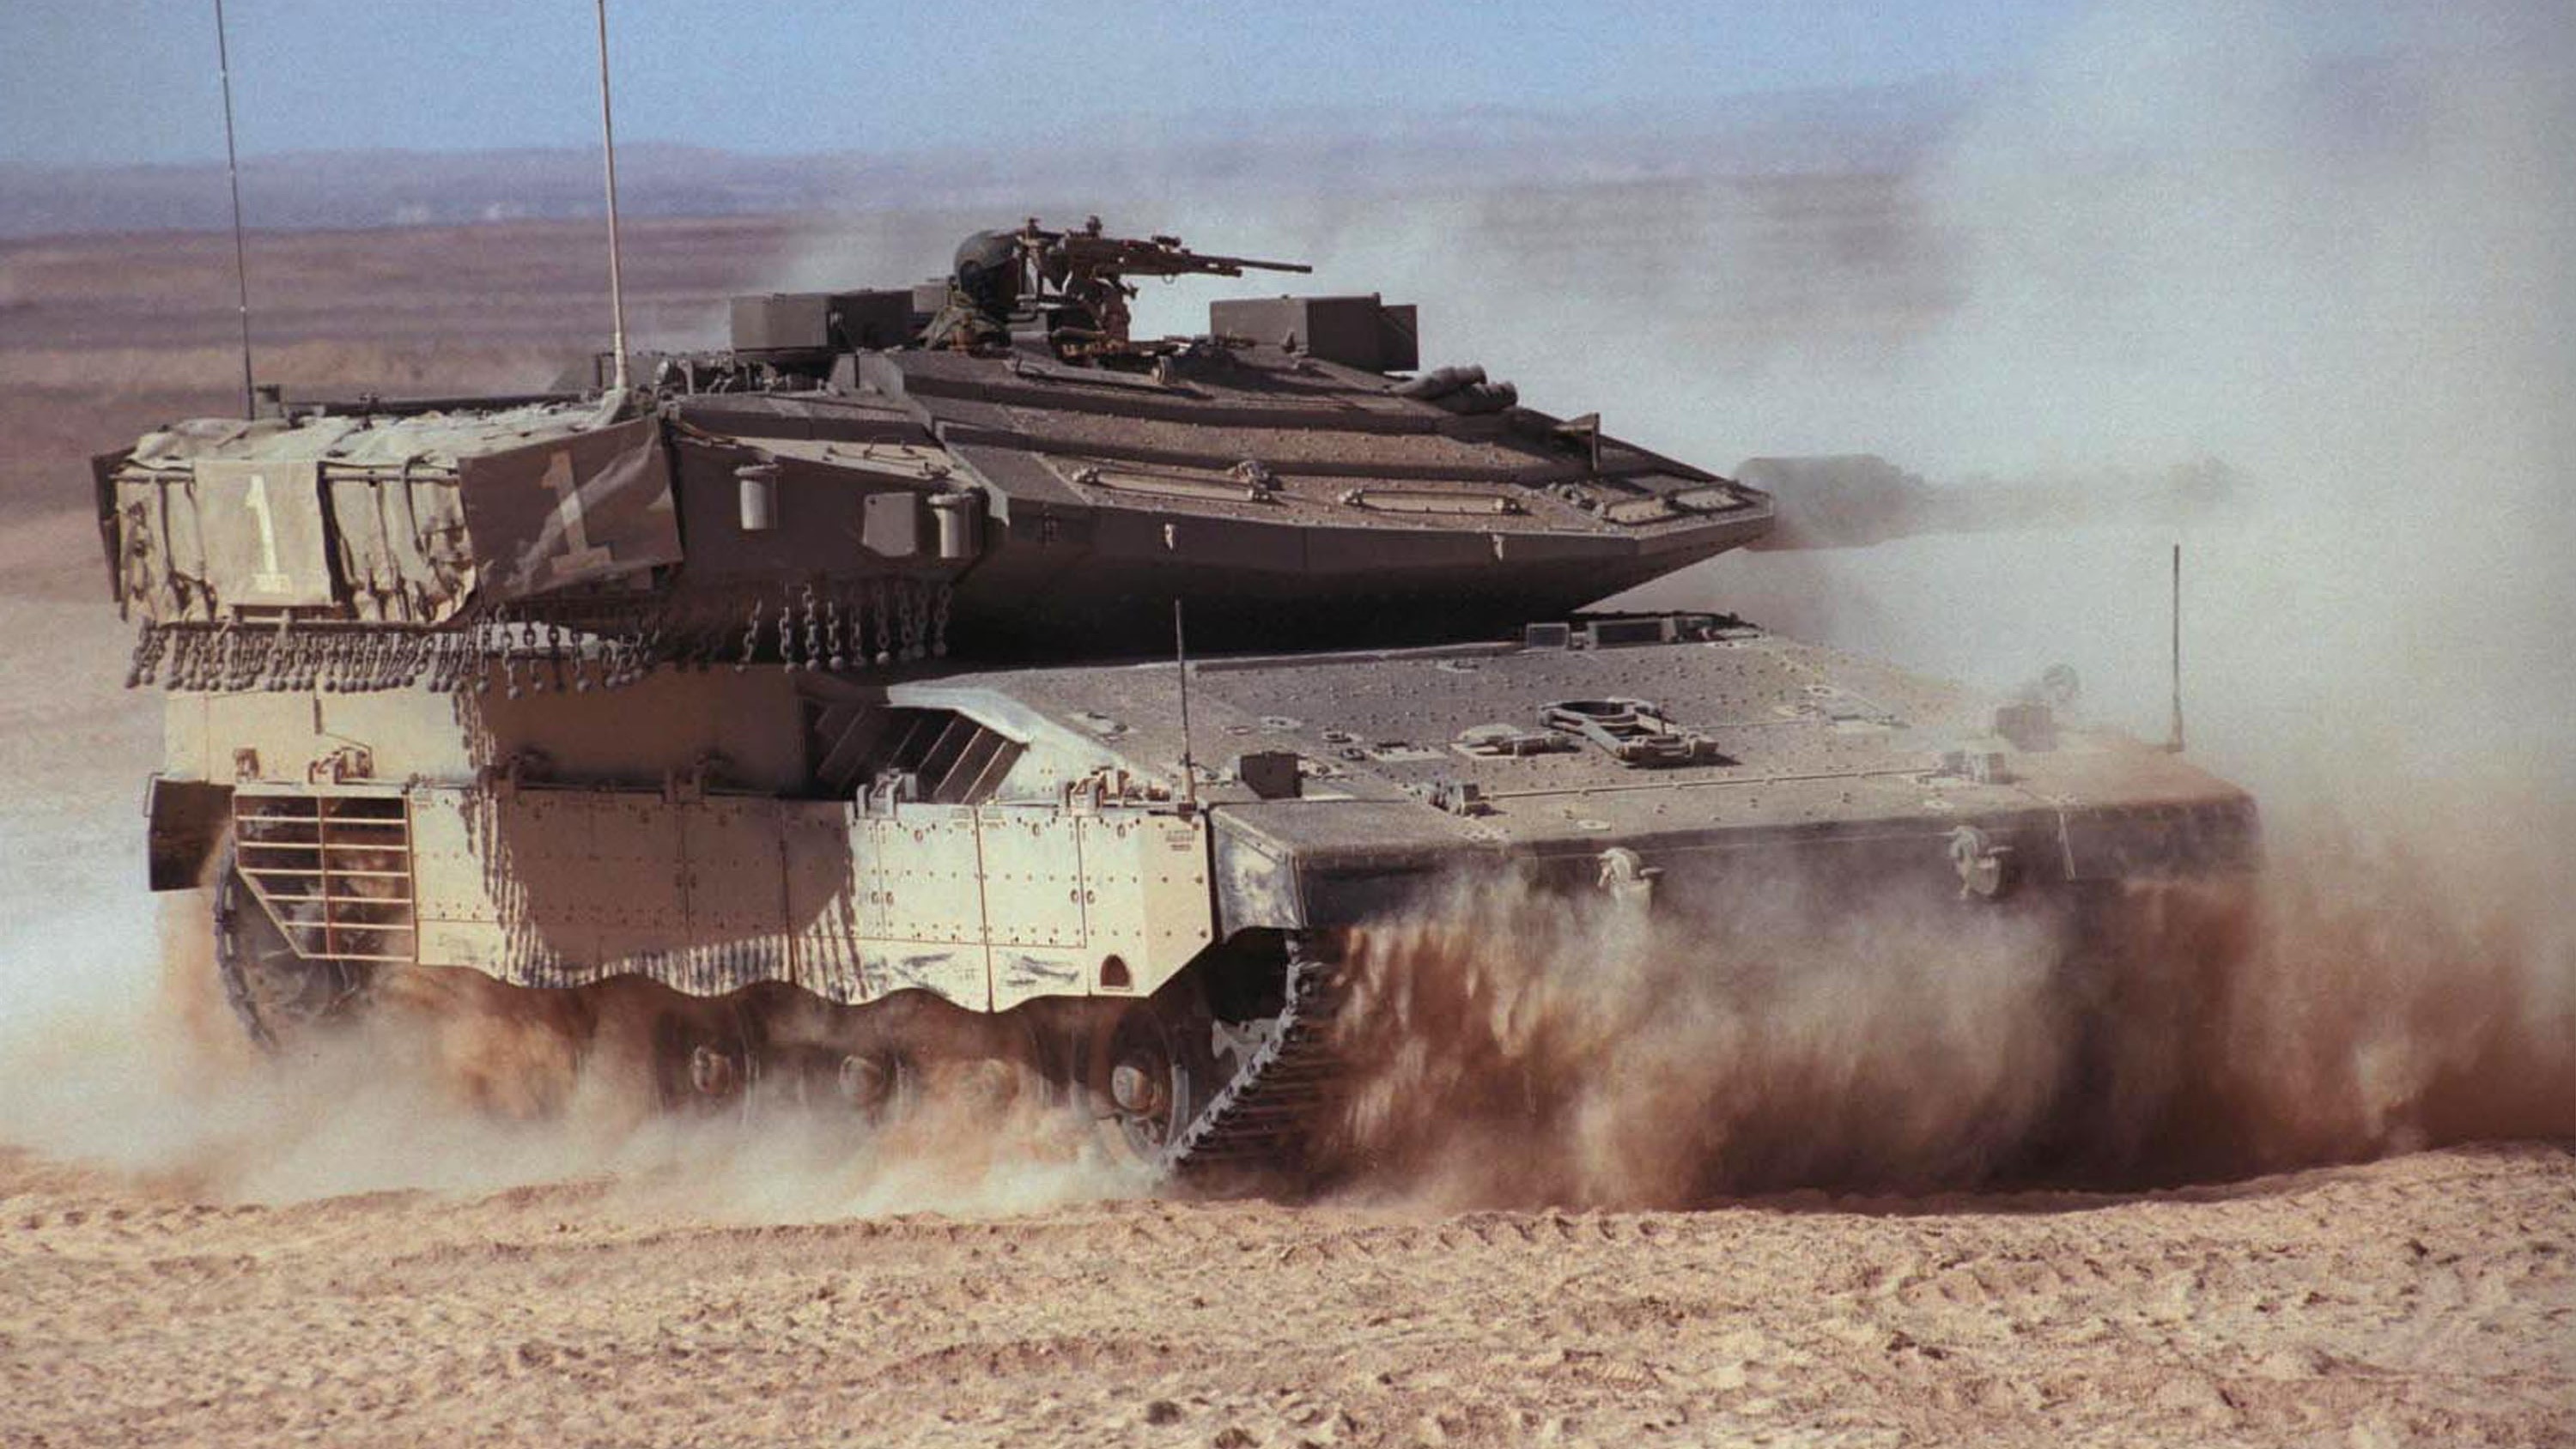 Israel To Enter Era Of Closed-Hatch Combat, See-Through Tanks